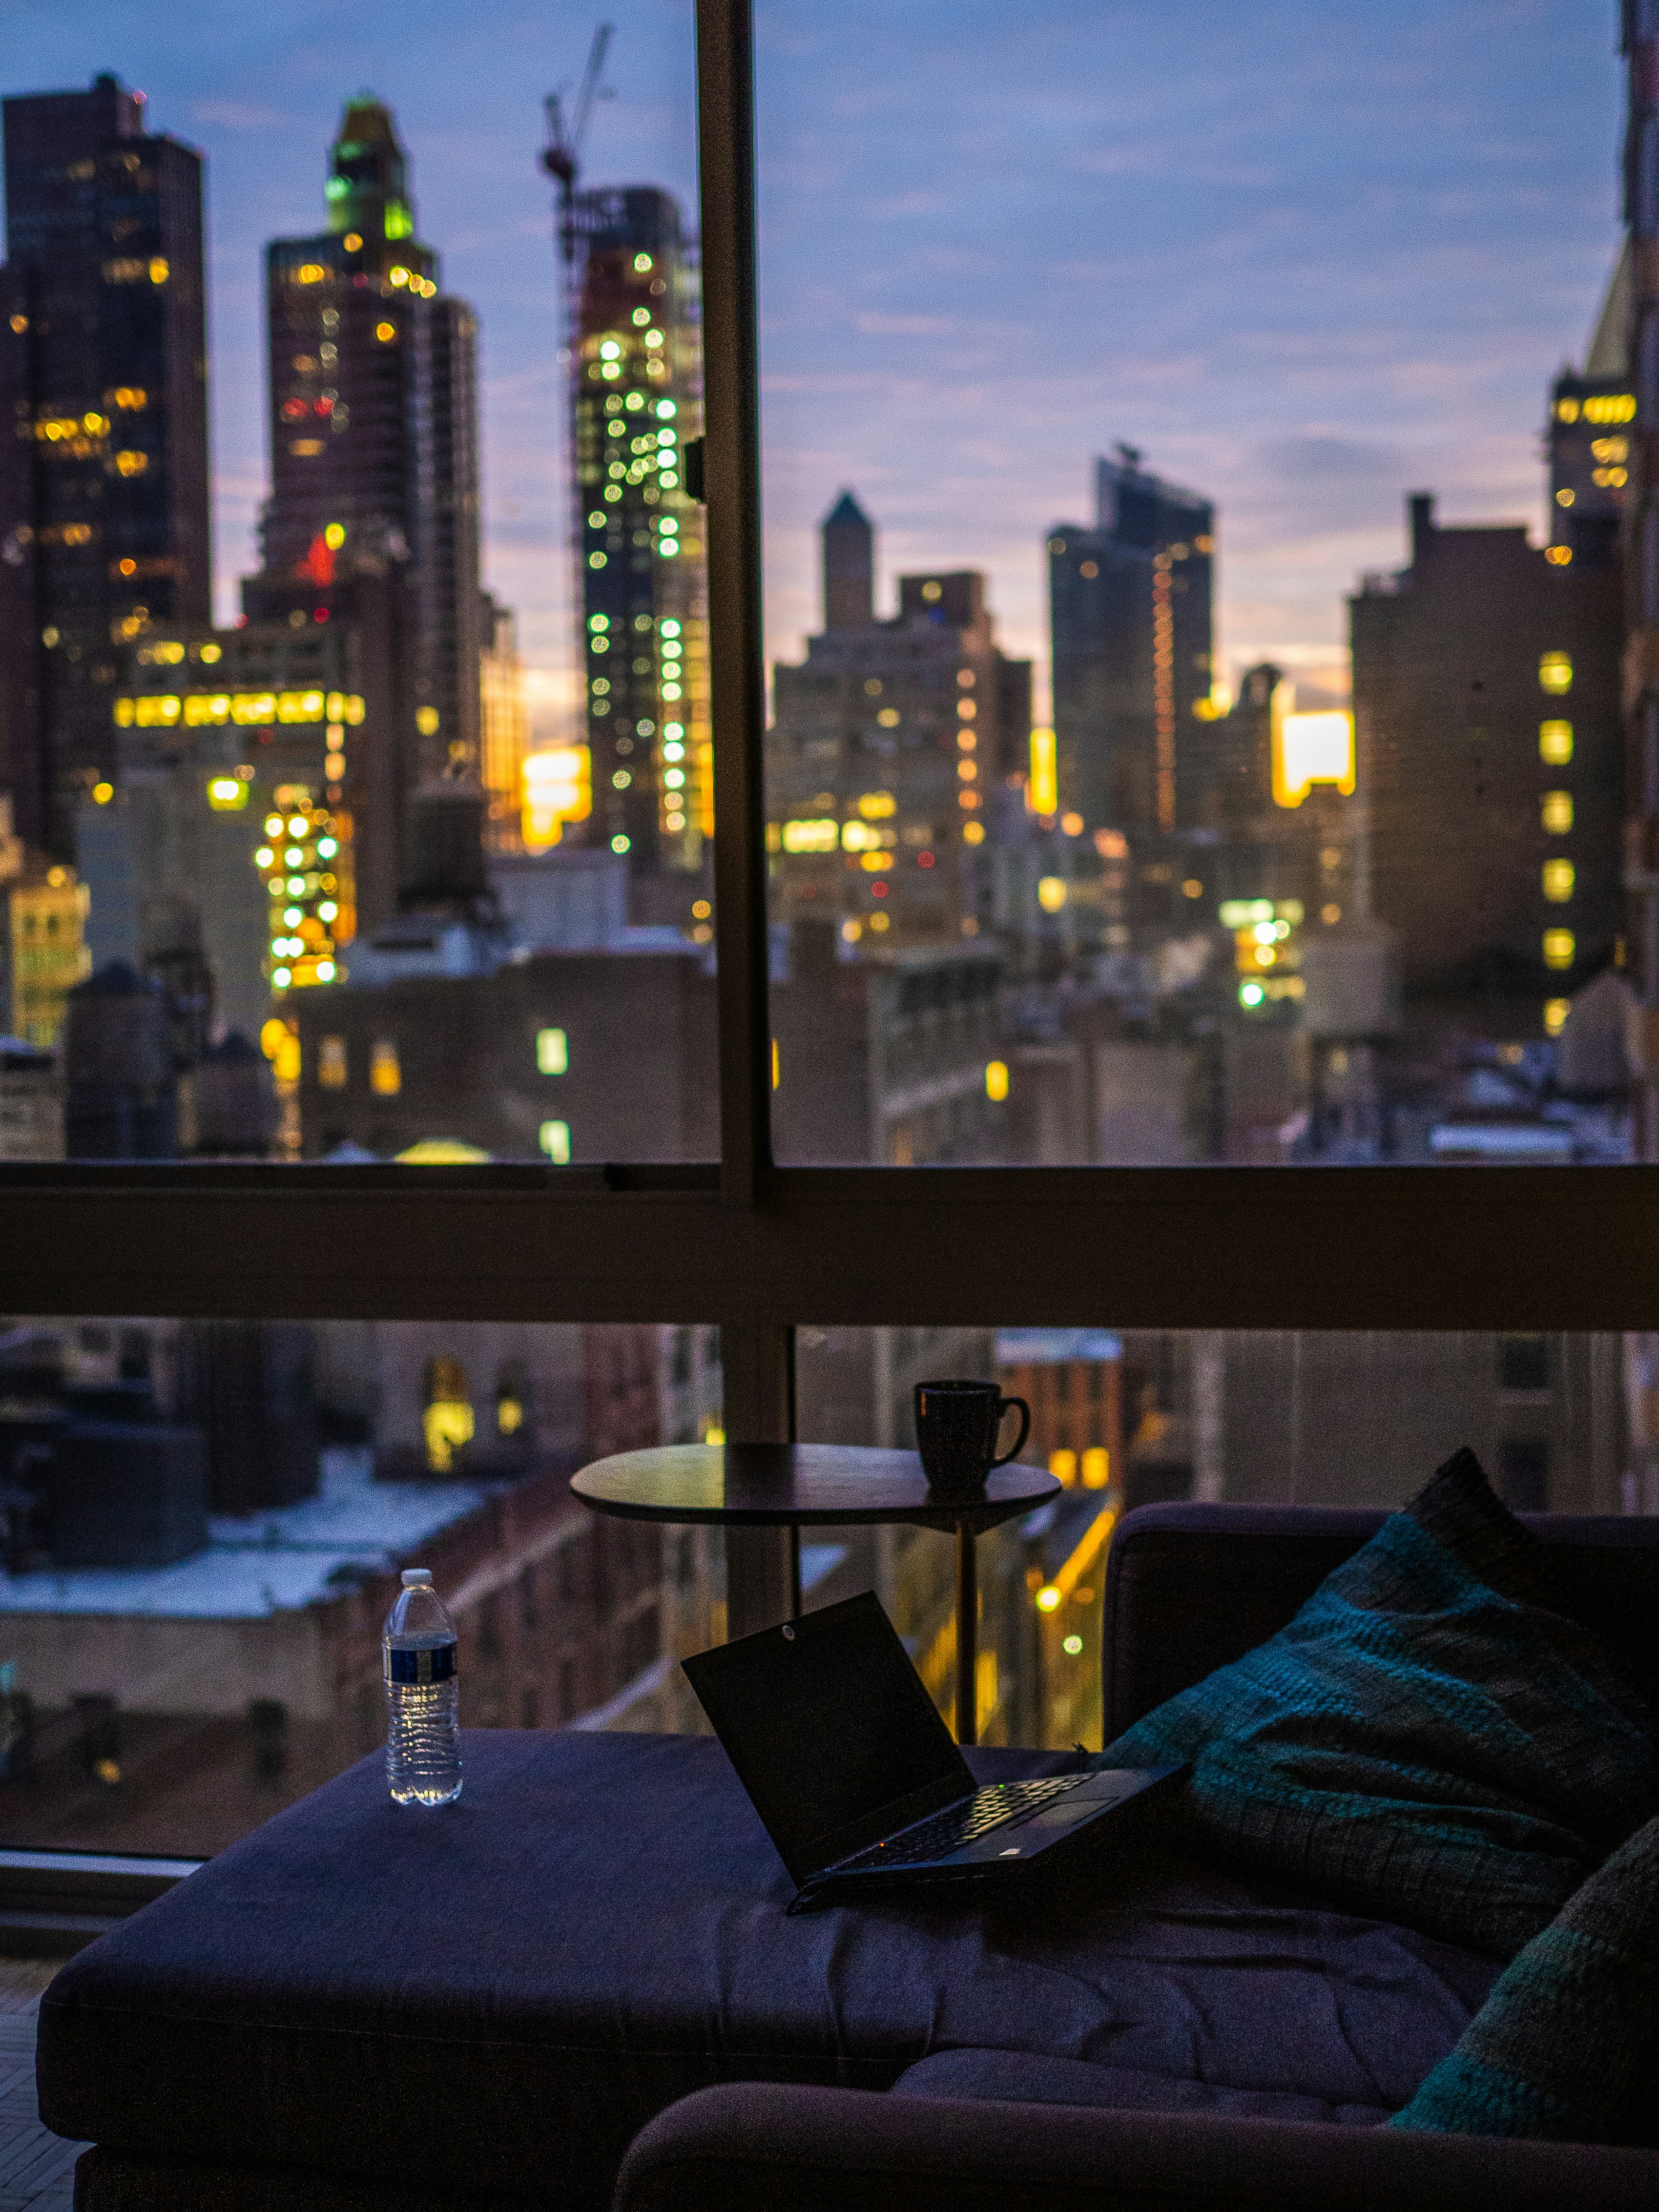 Photo of a laptop by a coffee table witha view of new york city